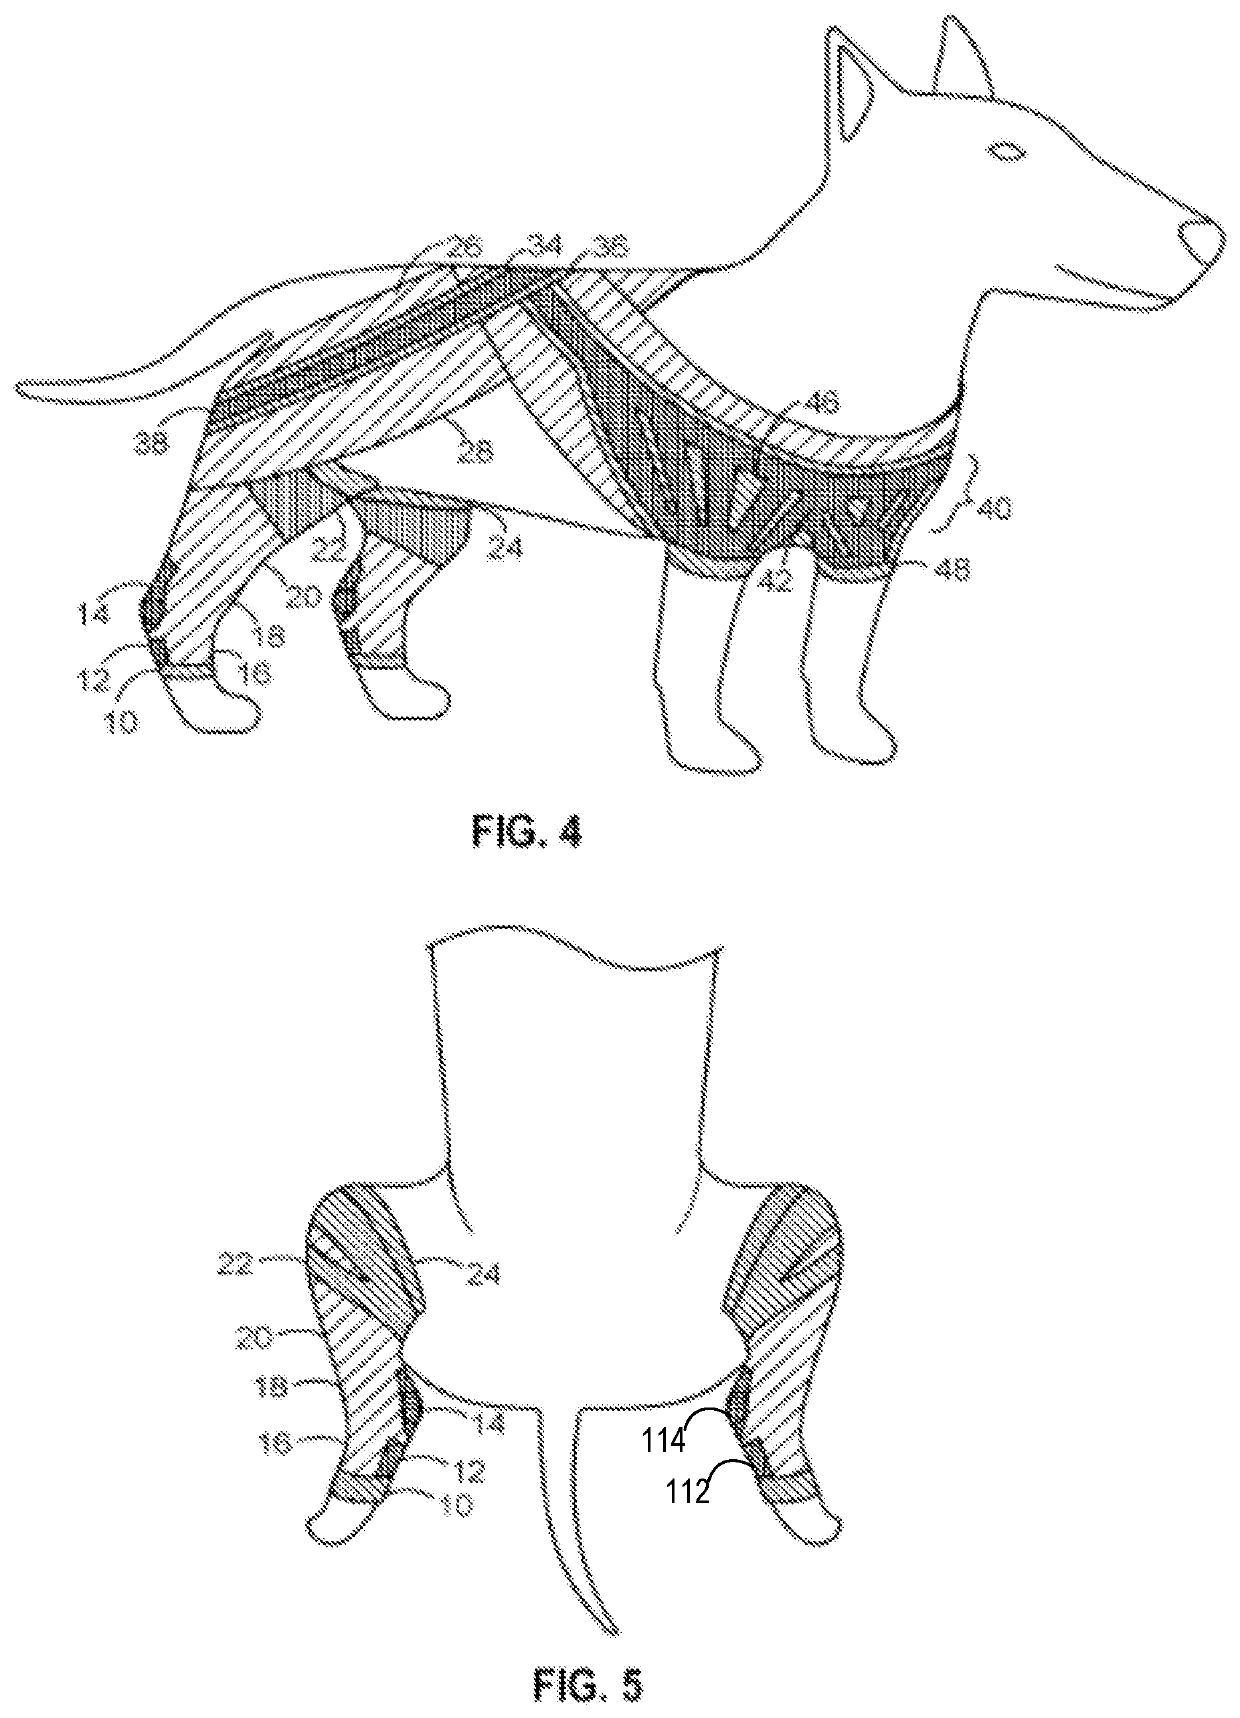 Support device for quadrupeds